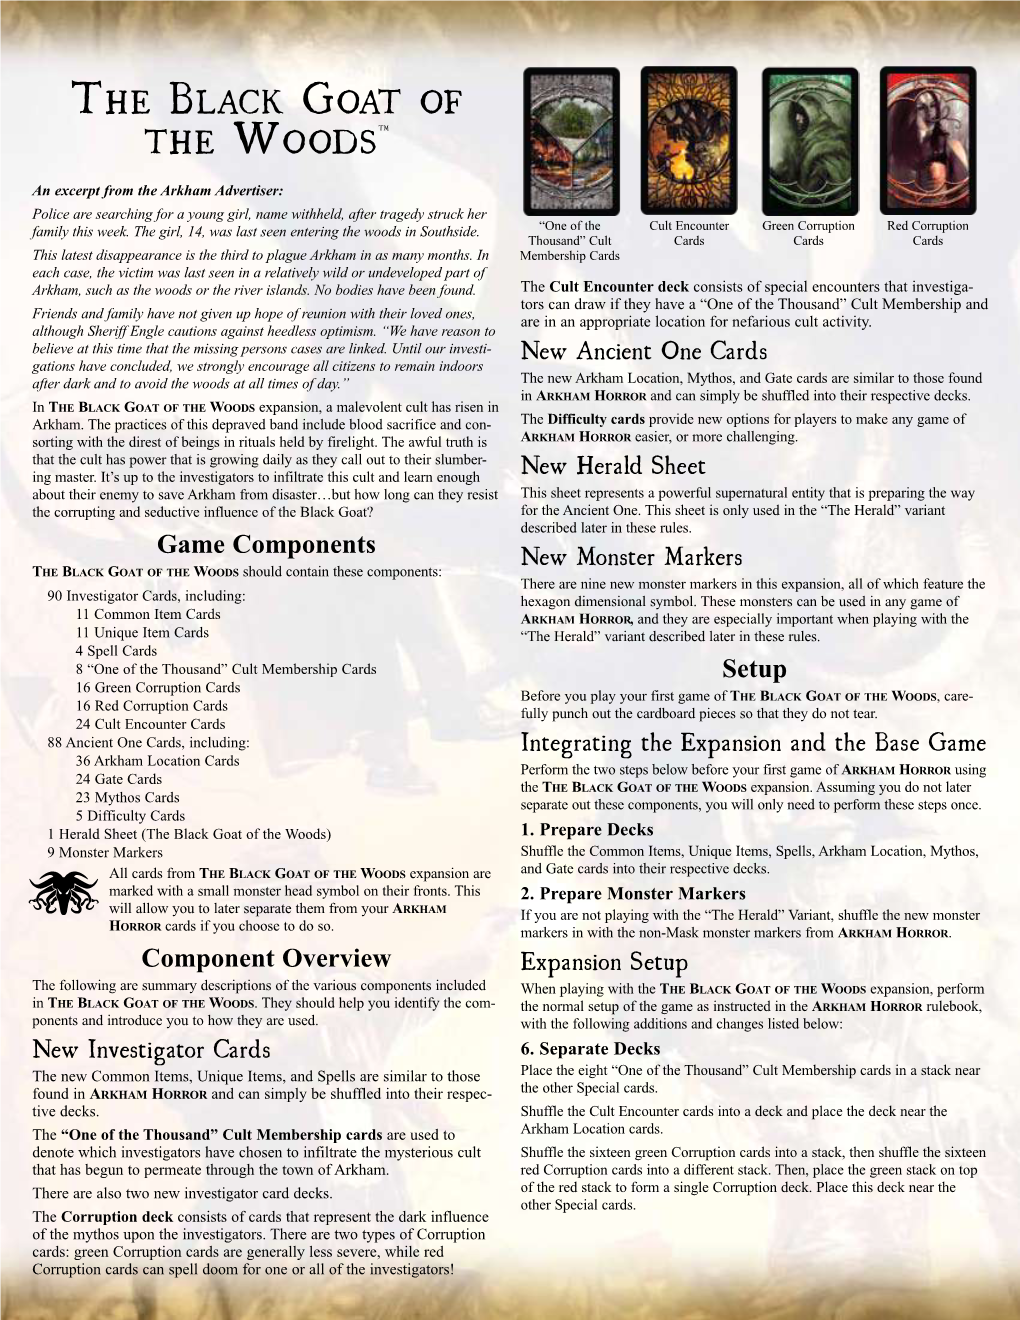 Arkham Horror: the Black Goat of the Woods Expansion Rulebook